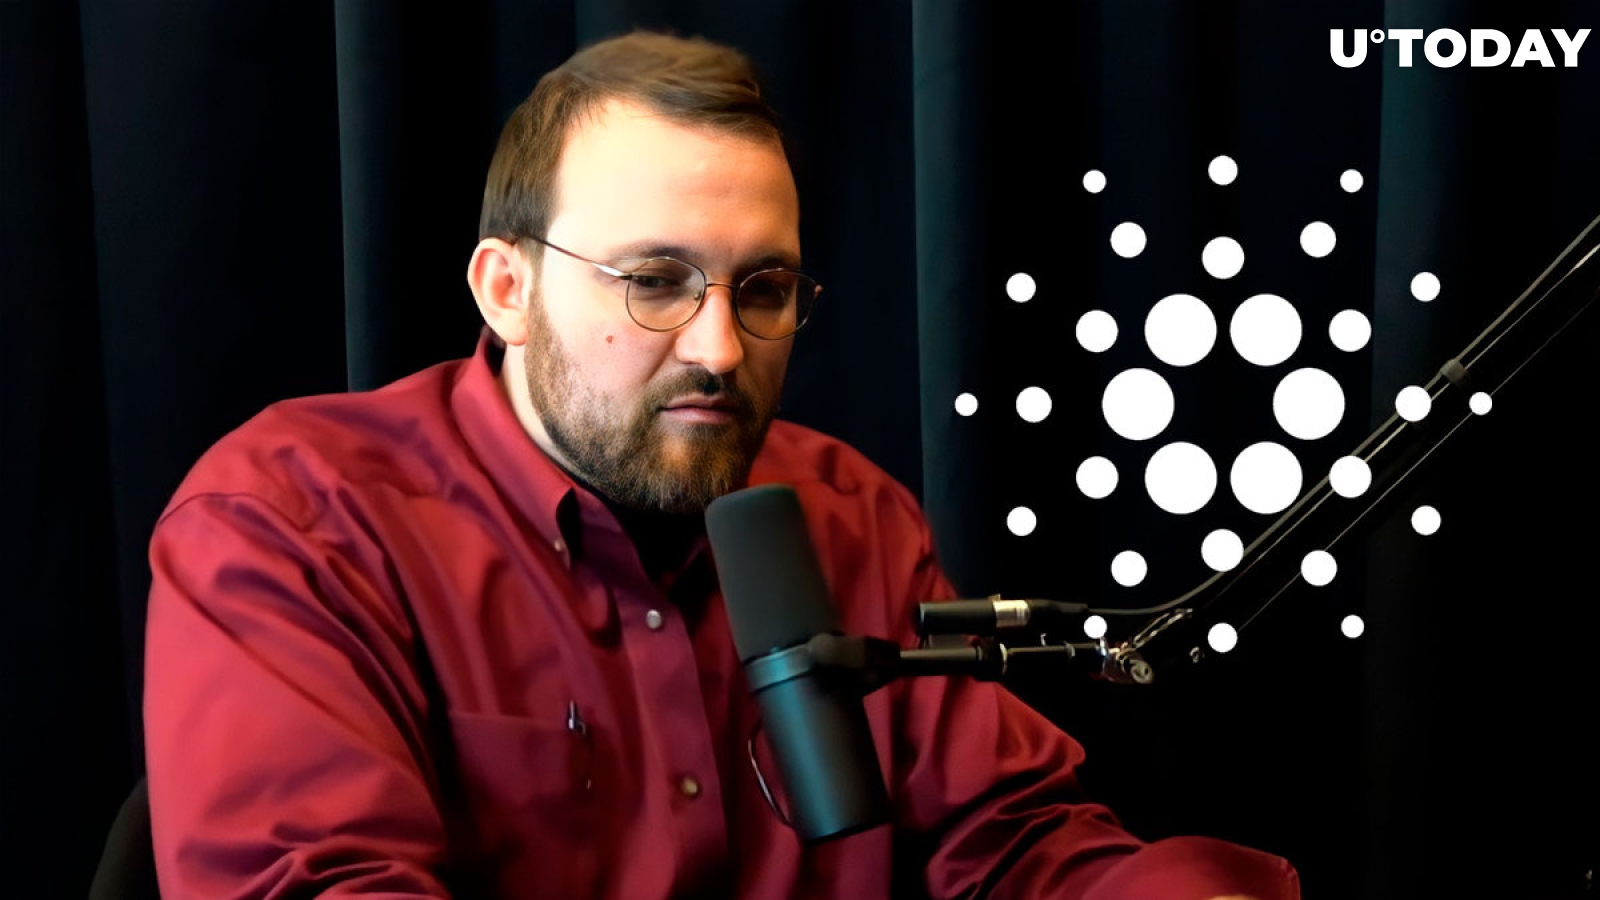 Cardano Founder: "We Are Getting to Vasil Finish Line" as Node Testing Continues